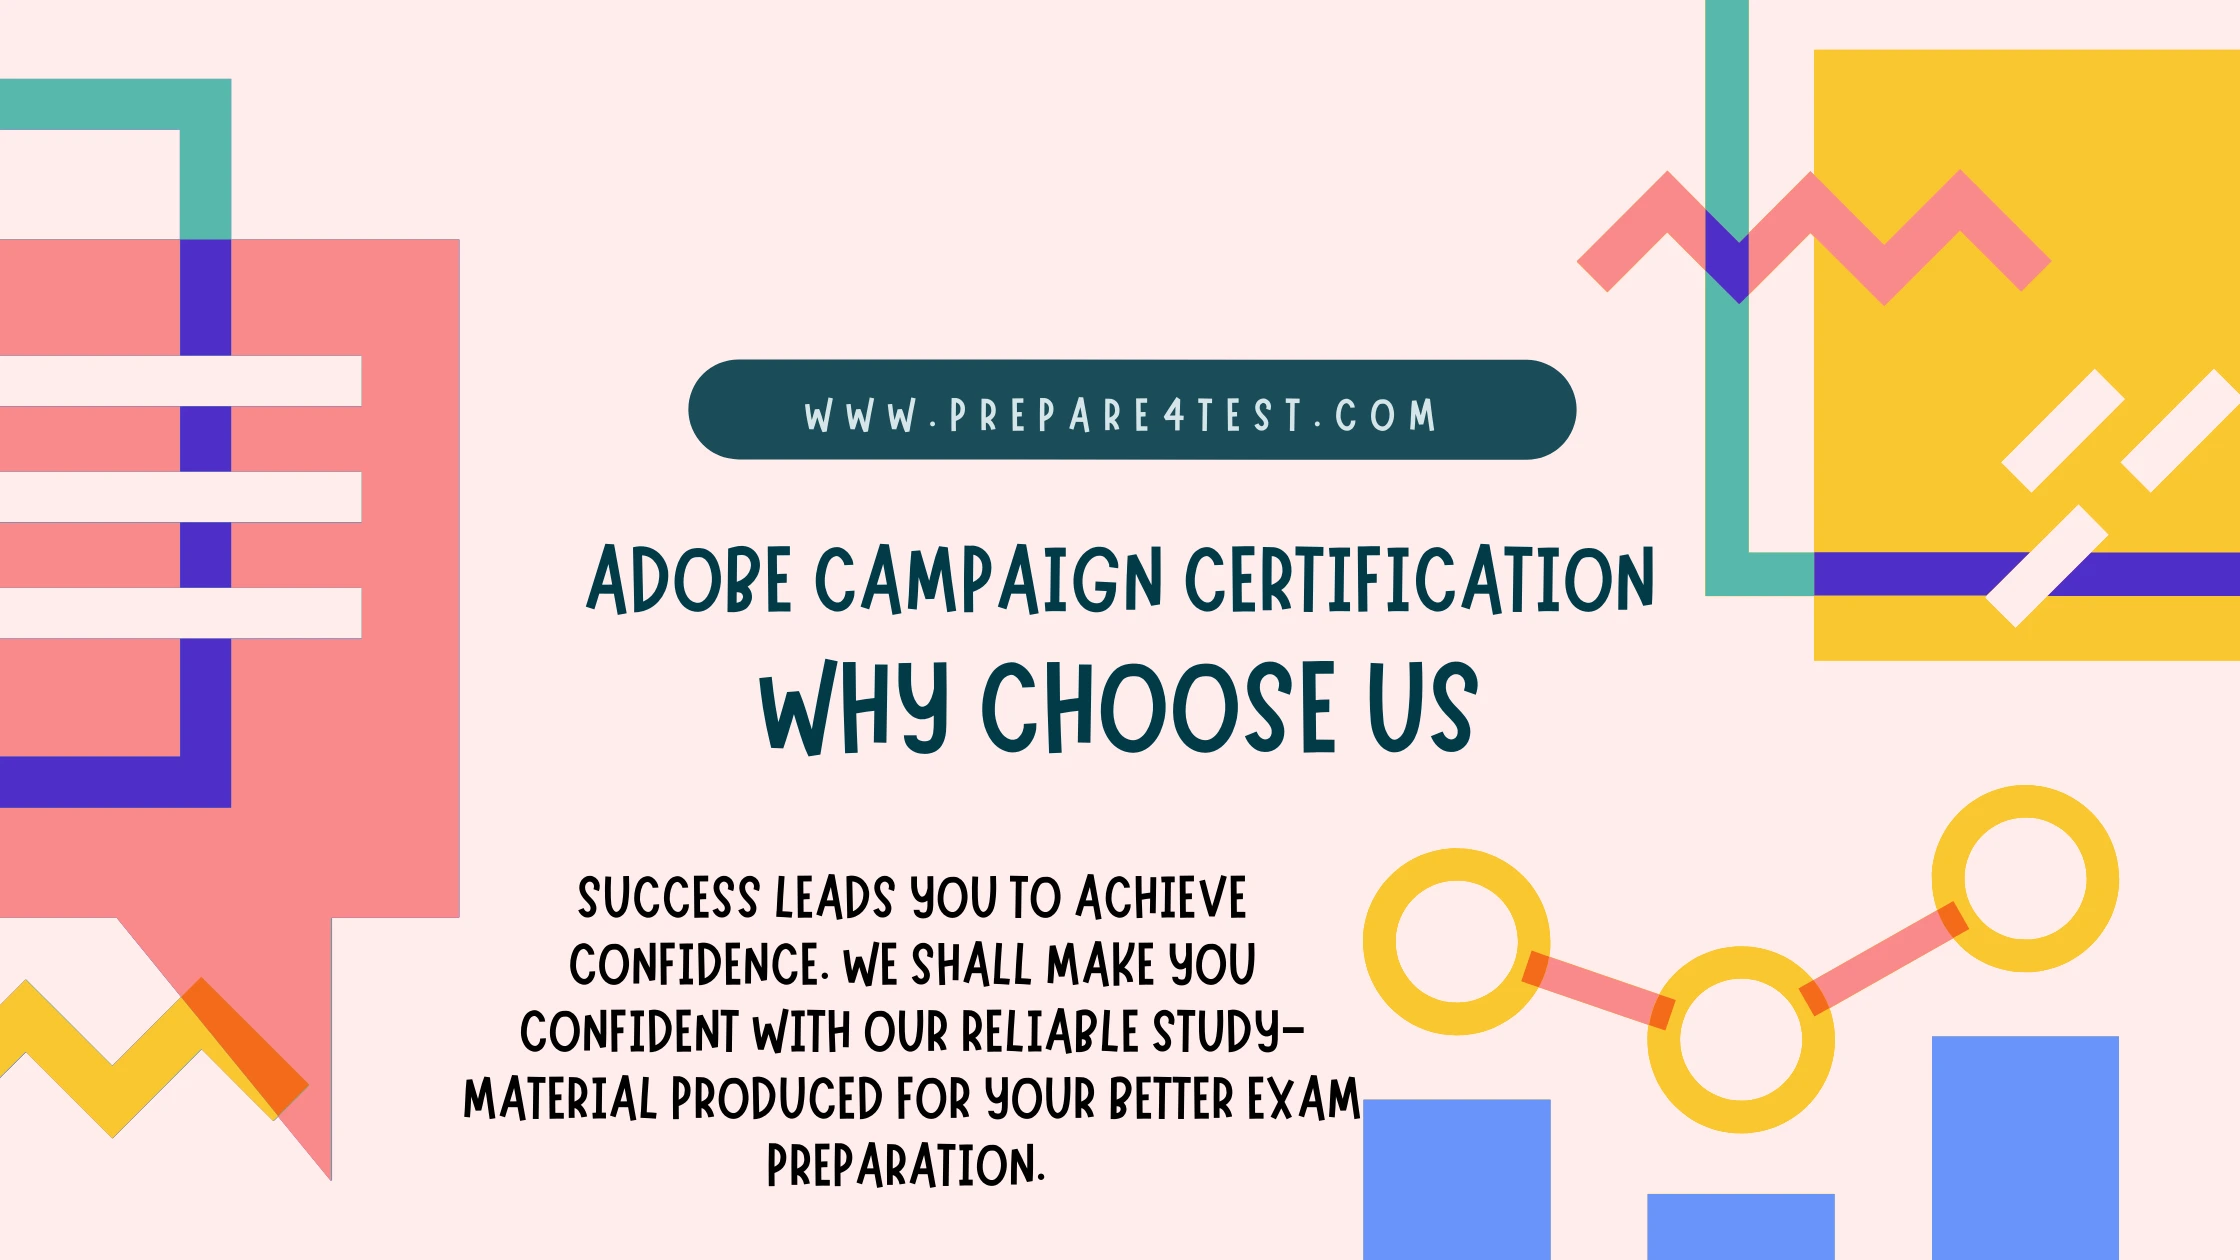 Adobe Campaign Certification Promotion